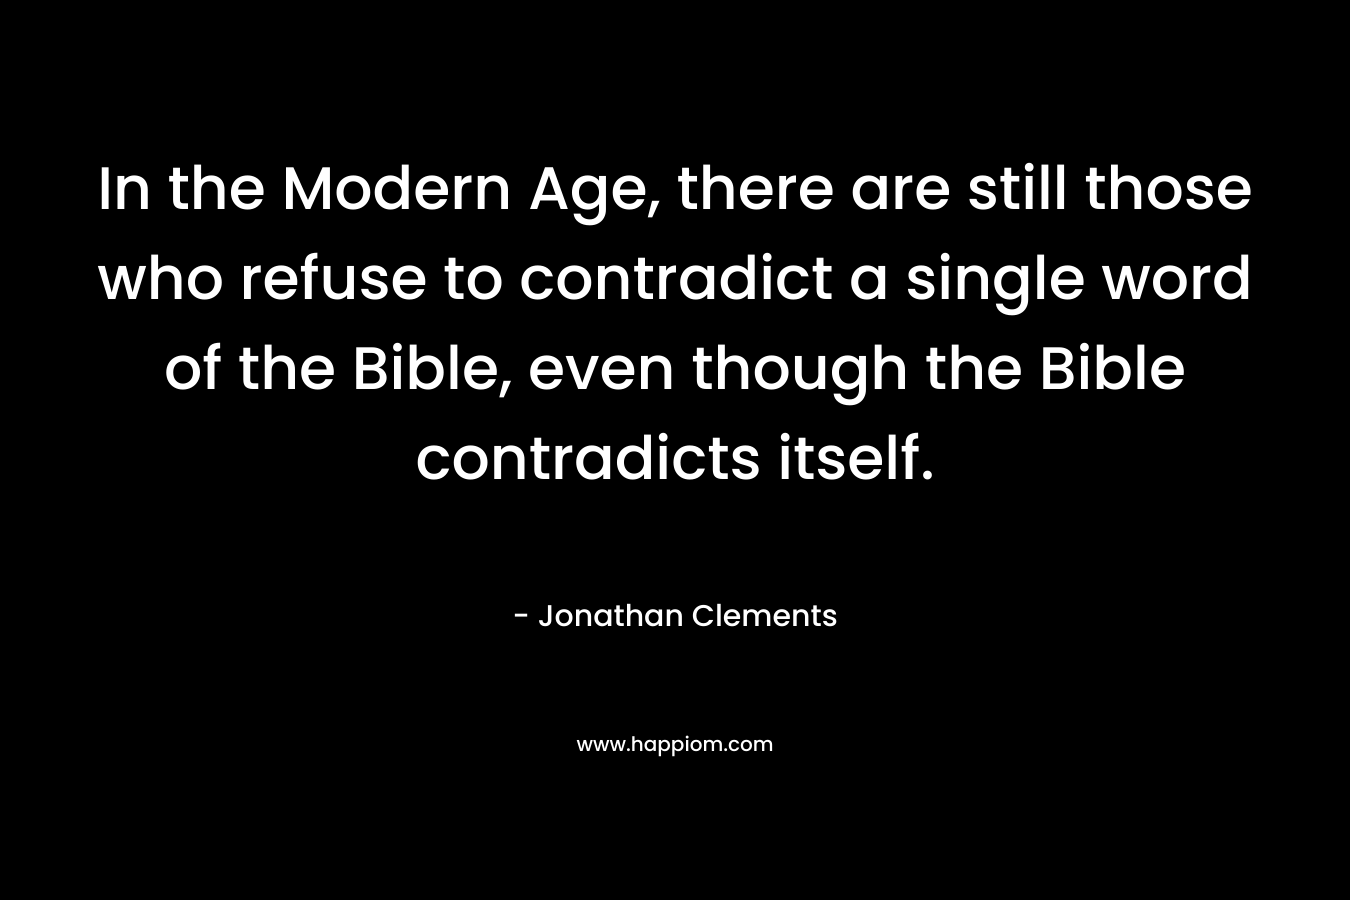 In the Modern Age, there are still those who refuse to contradict a single word of the Bible, even though the Bible contradicts itself. – Jonathan Clements